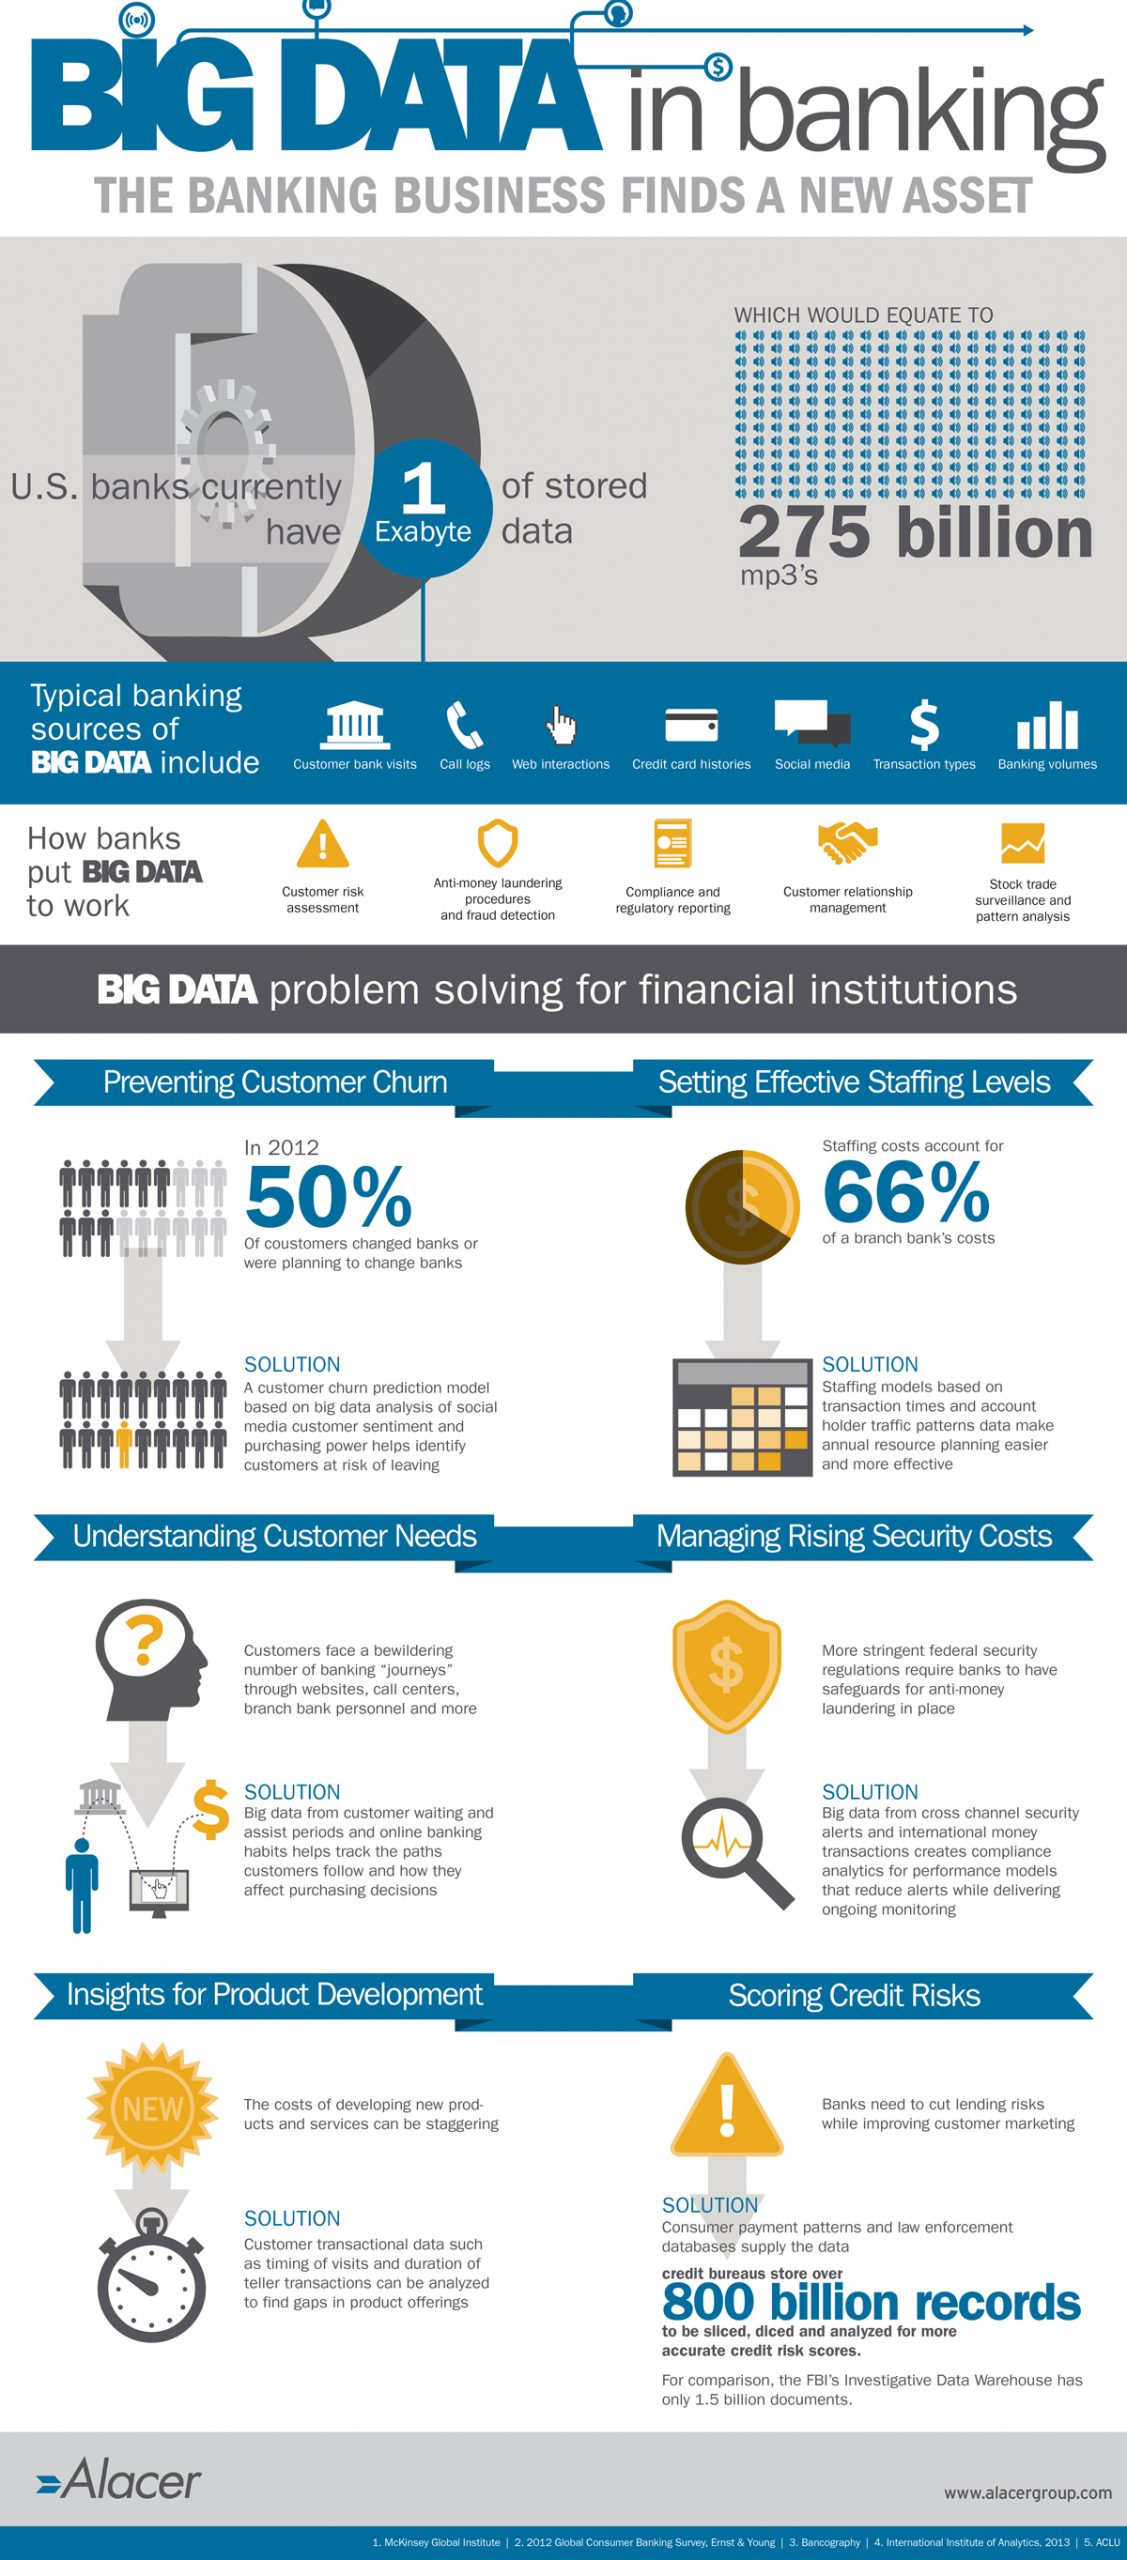 Big Data is big business in banking